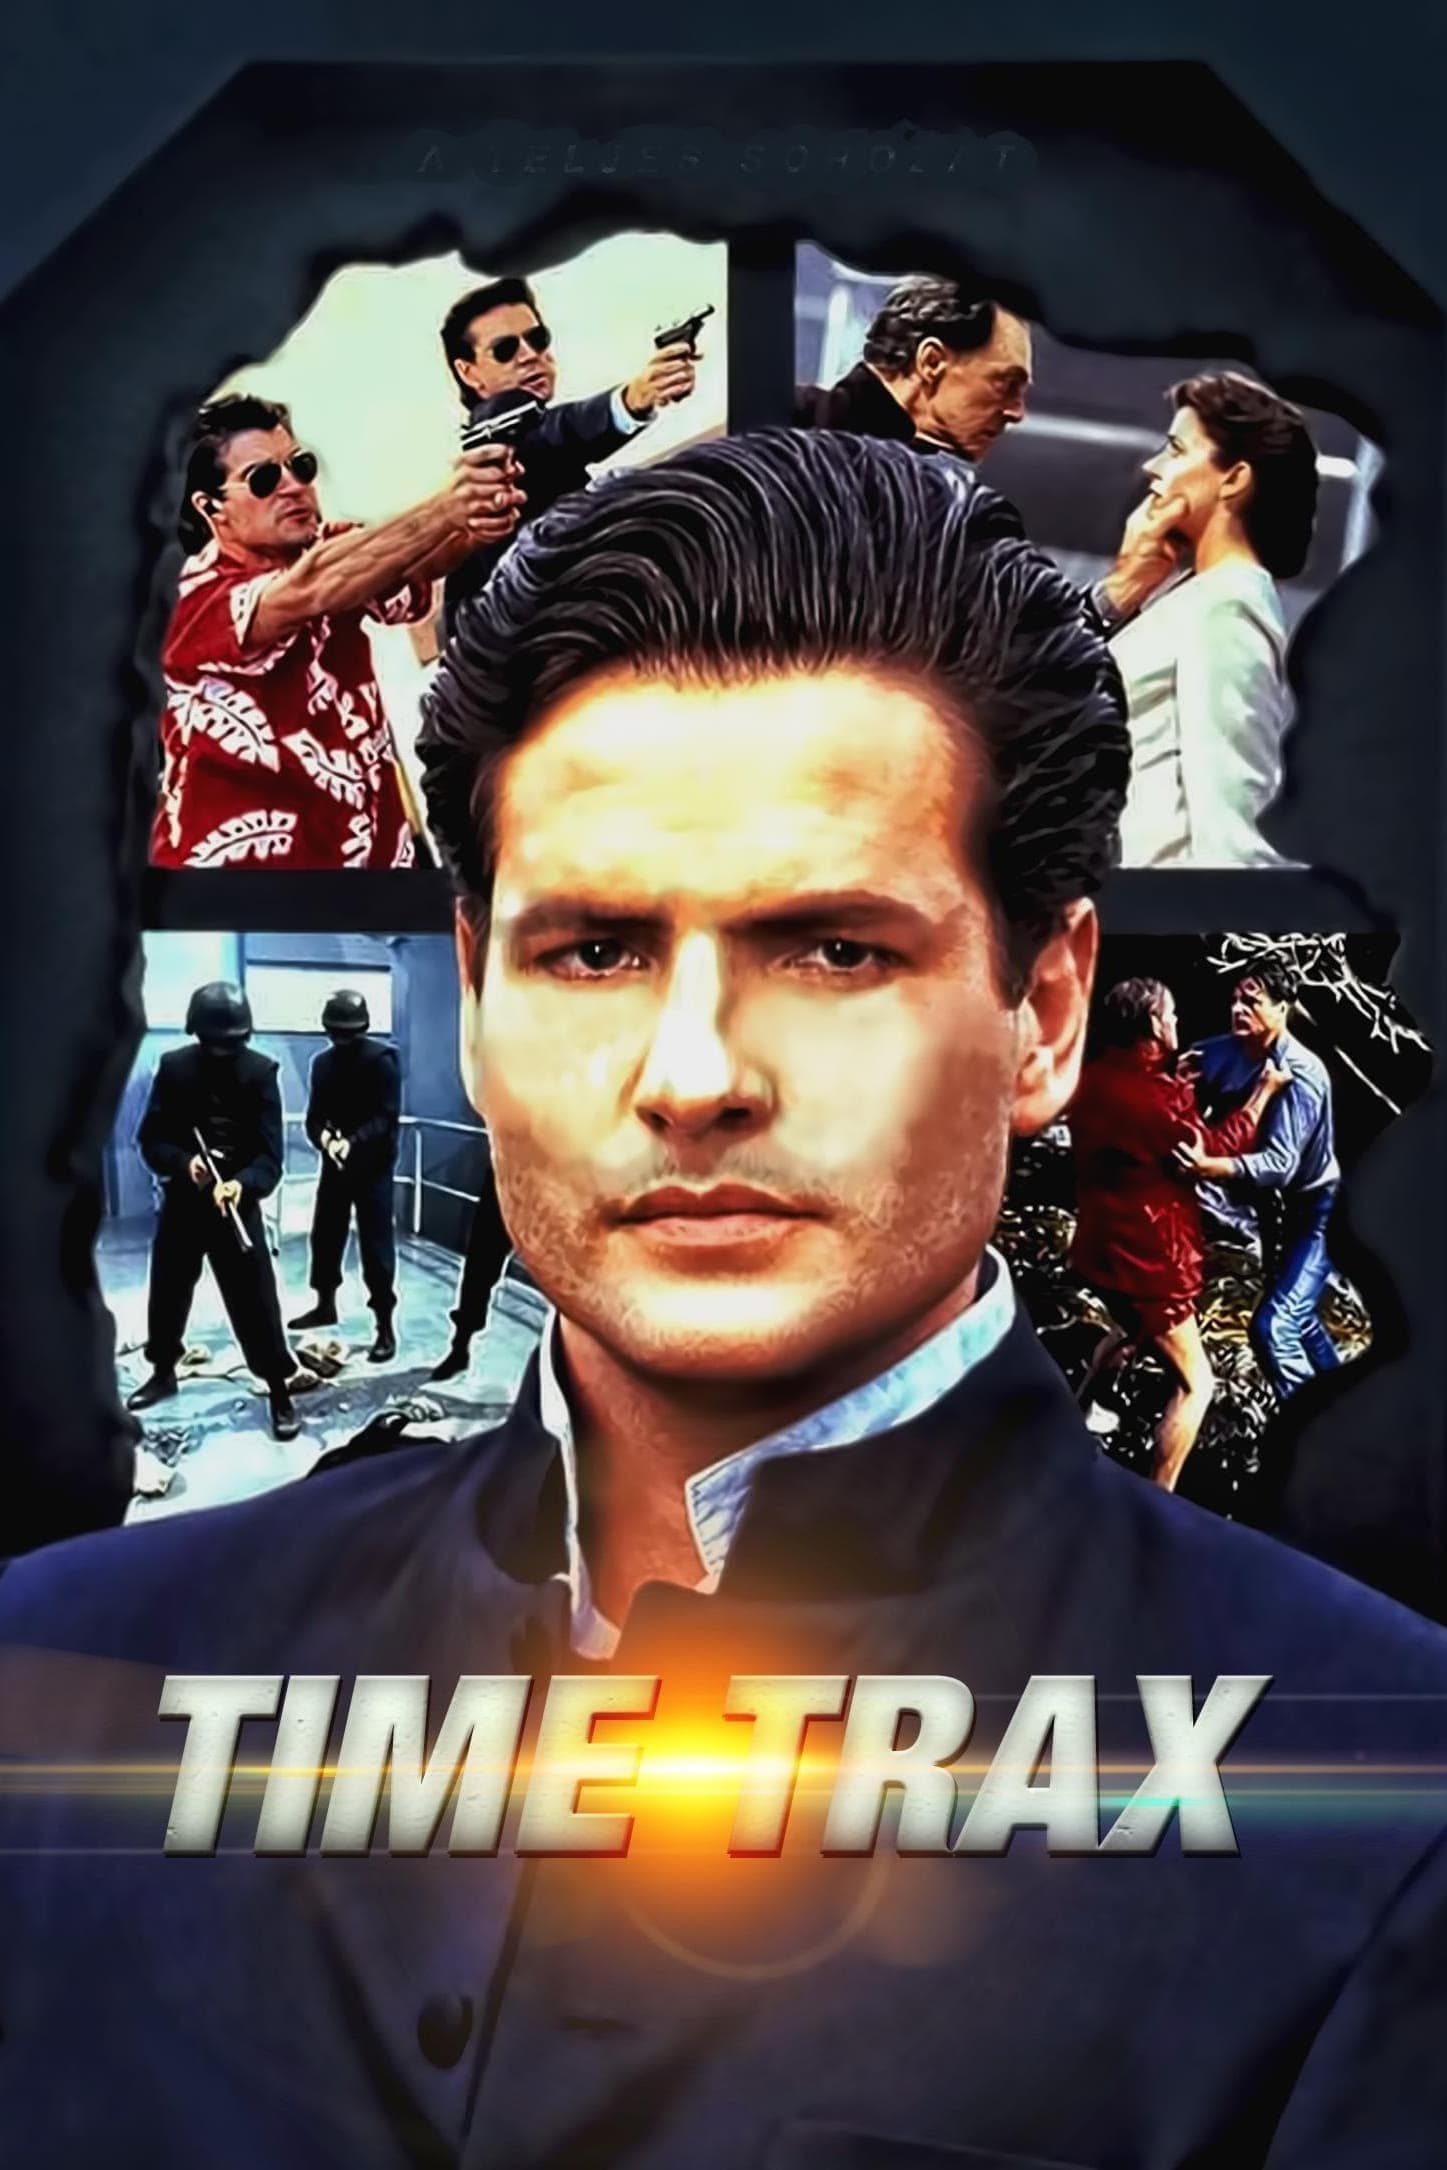 Time Trax (1993)